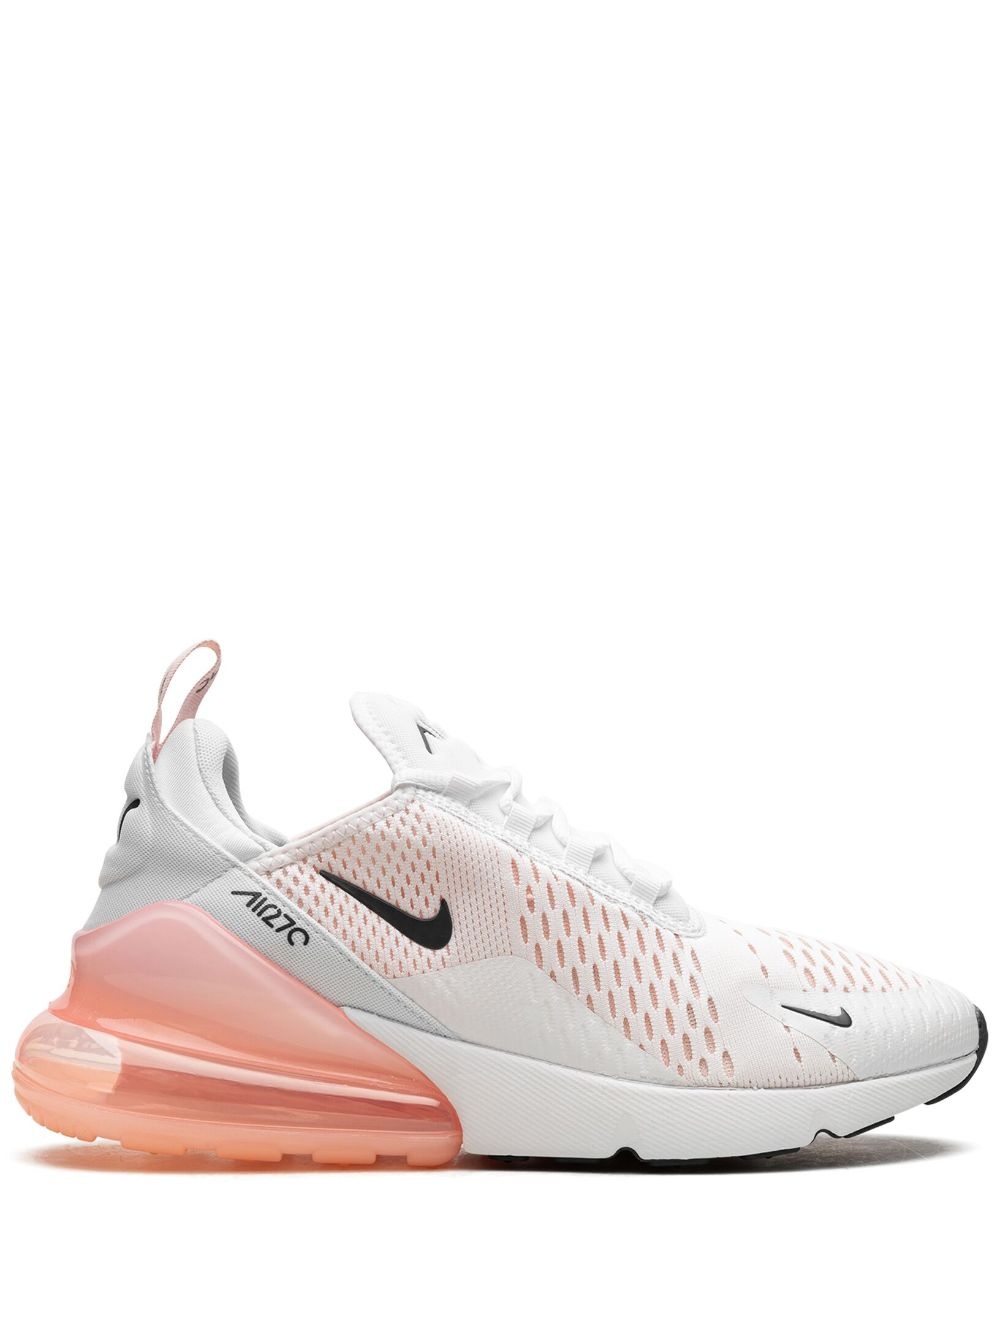 Air Max 270 "White Bleached Coral" sneakers - 1